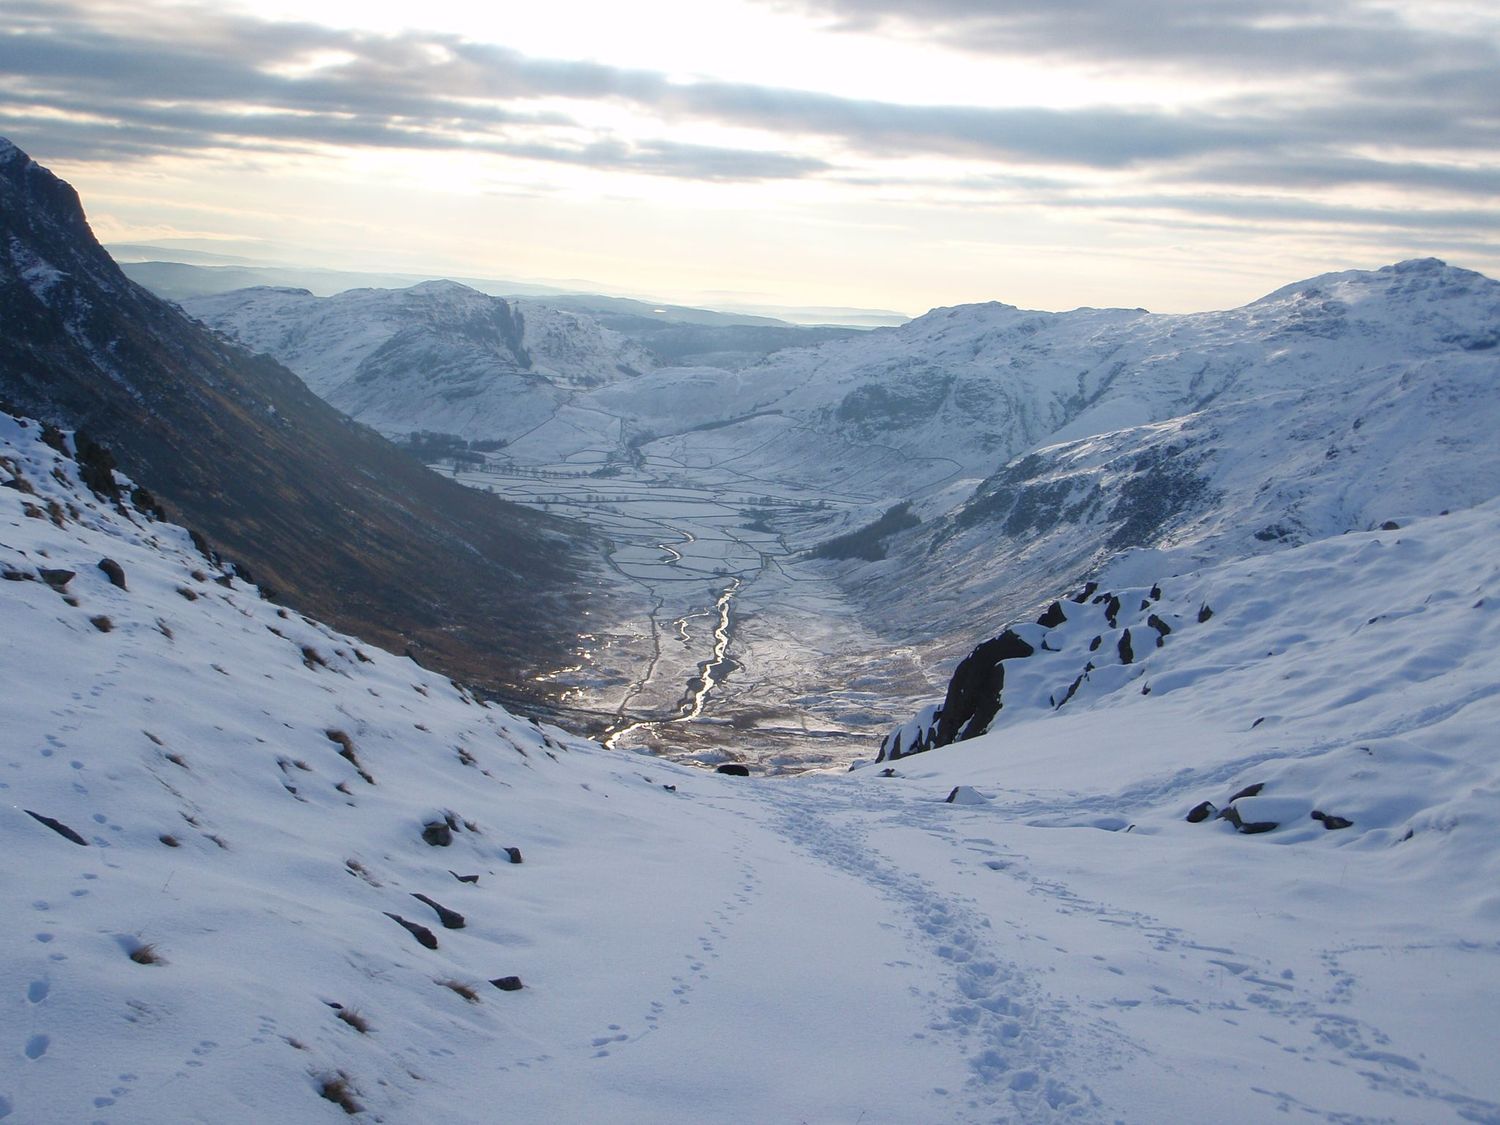  The Lake District mountains in winter - Chris Ensoll Mountain Guide 